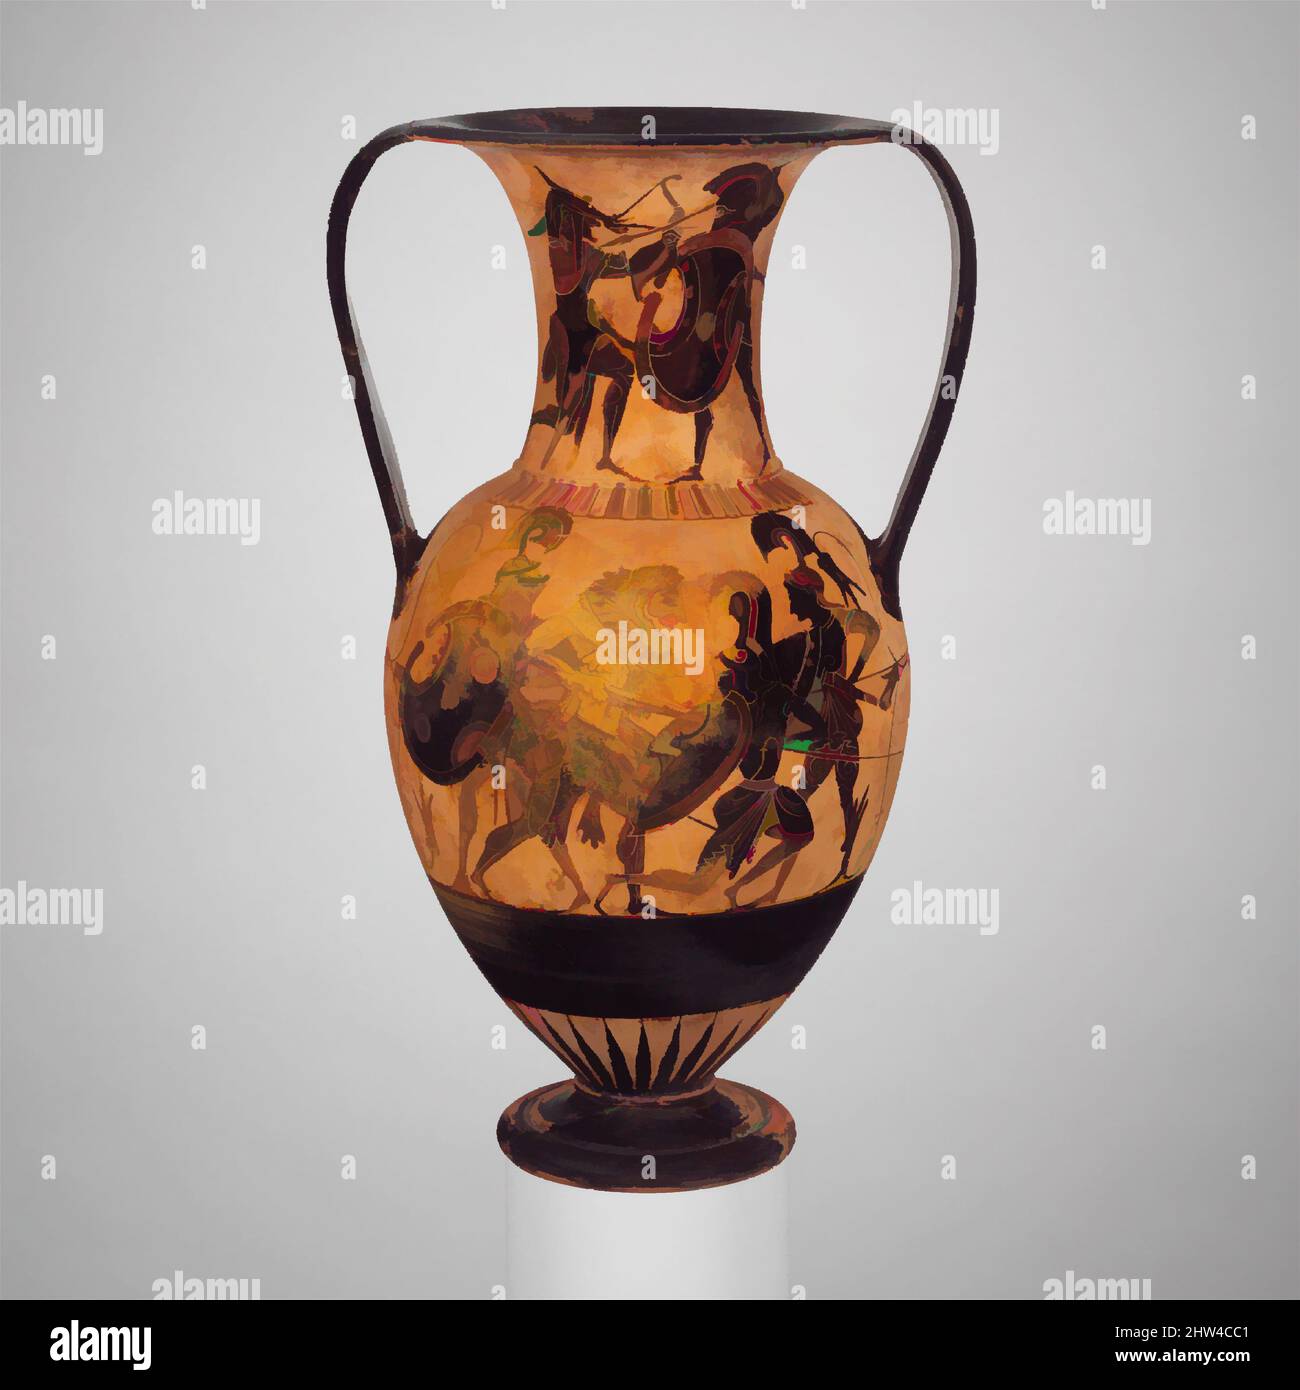 Art inspired by Terracotta neck-amphora of Nicosthenic shape (jar), Archaic, ca. 510 B.C., Greek, Attic, Terracotta; black-figure, H. 11 1/4 in. (28.5 cm); diameter of mouth 5 1/4 in. (13.3 cm); diameter of foot 3 3/8 in. (8.5 cm), Vases, Obverse, Herakles fighting Amazons; on the neck, Classic works modernized by Artotop with a splash of modernity. Shapes, color and value, eye-catching visual impact on art. Emotions through freedom of artworks in a contemporary way. A timeless message pursuing a wildly creative new direction. Artists turning to the digital medium and creating the Artotop NFT Stock Photo